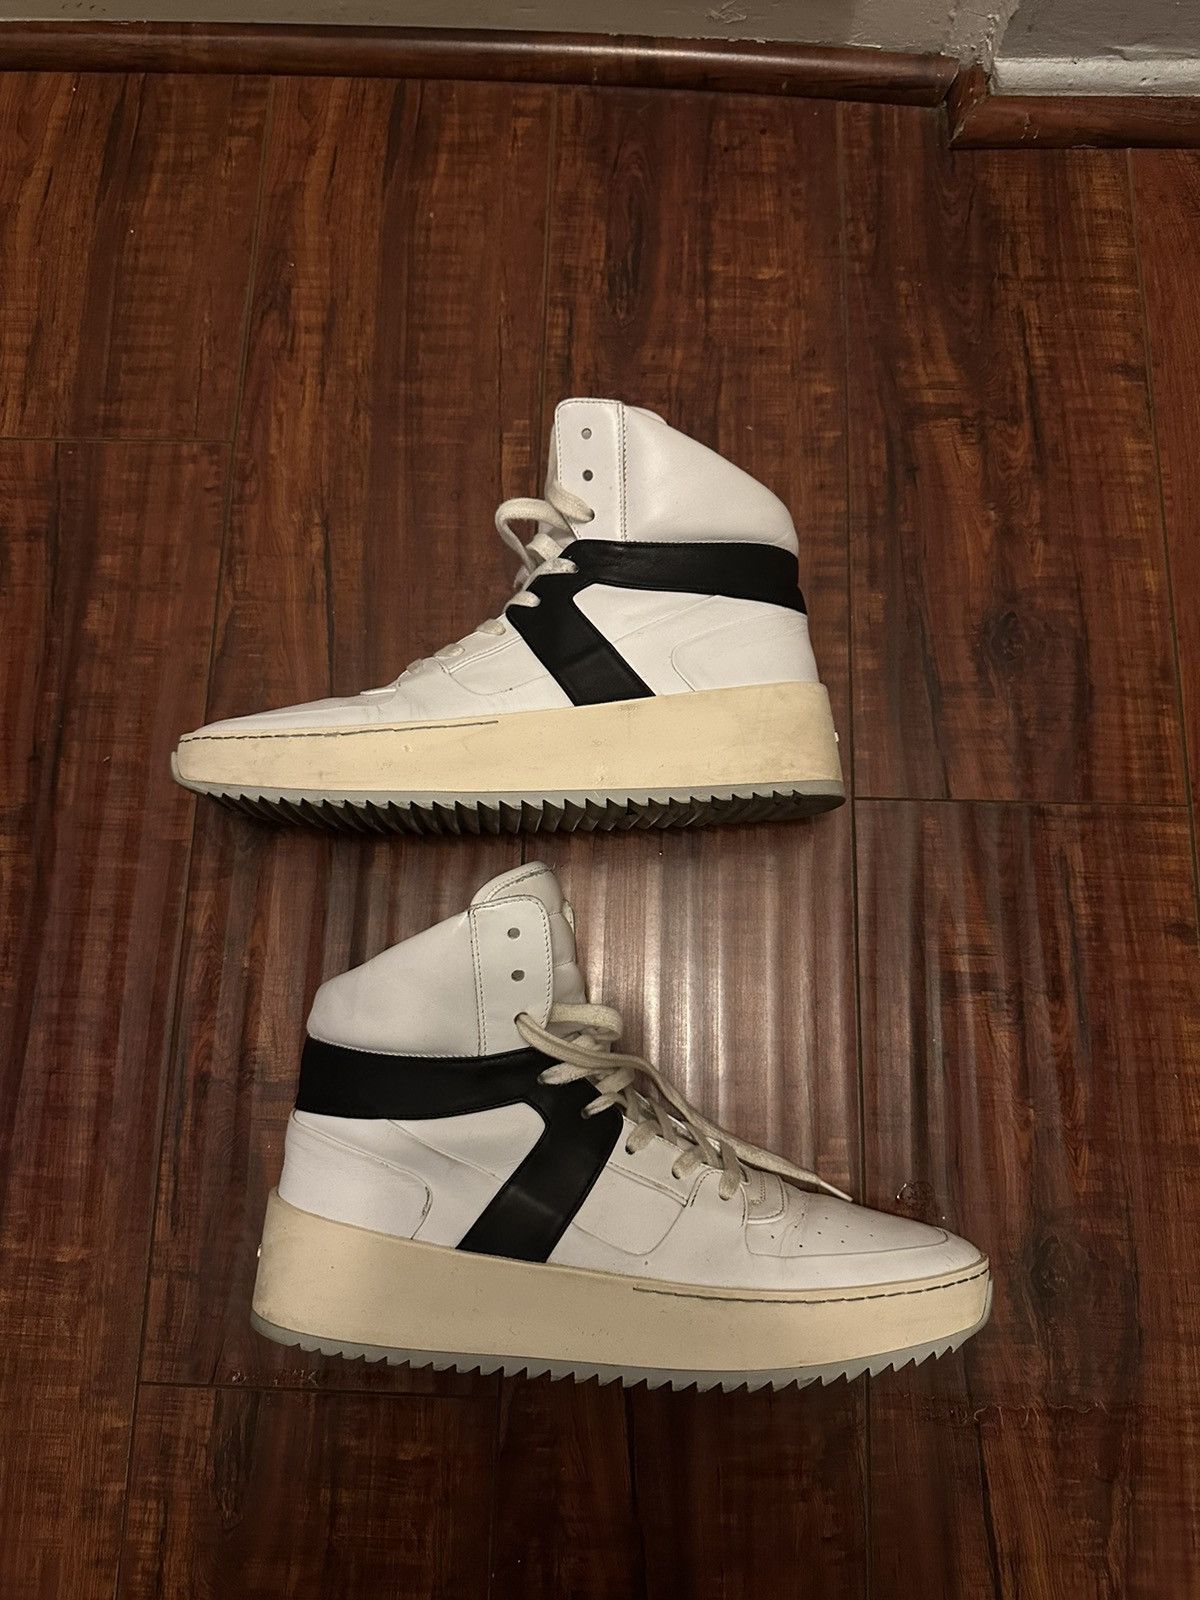 Fear Of God Basketball Sneakers | Grailed